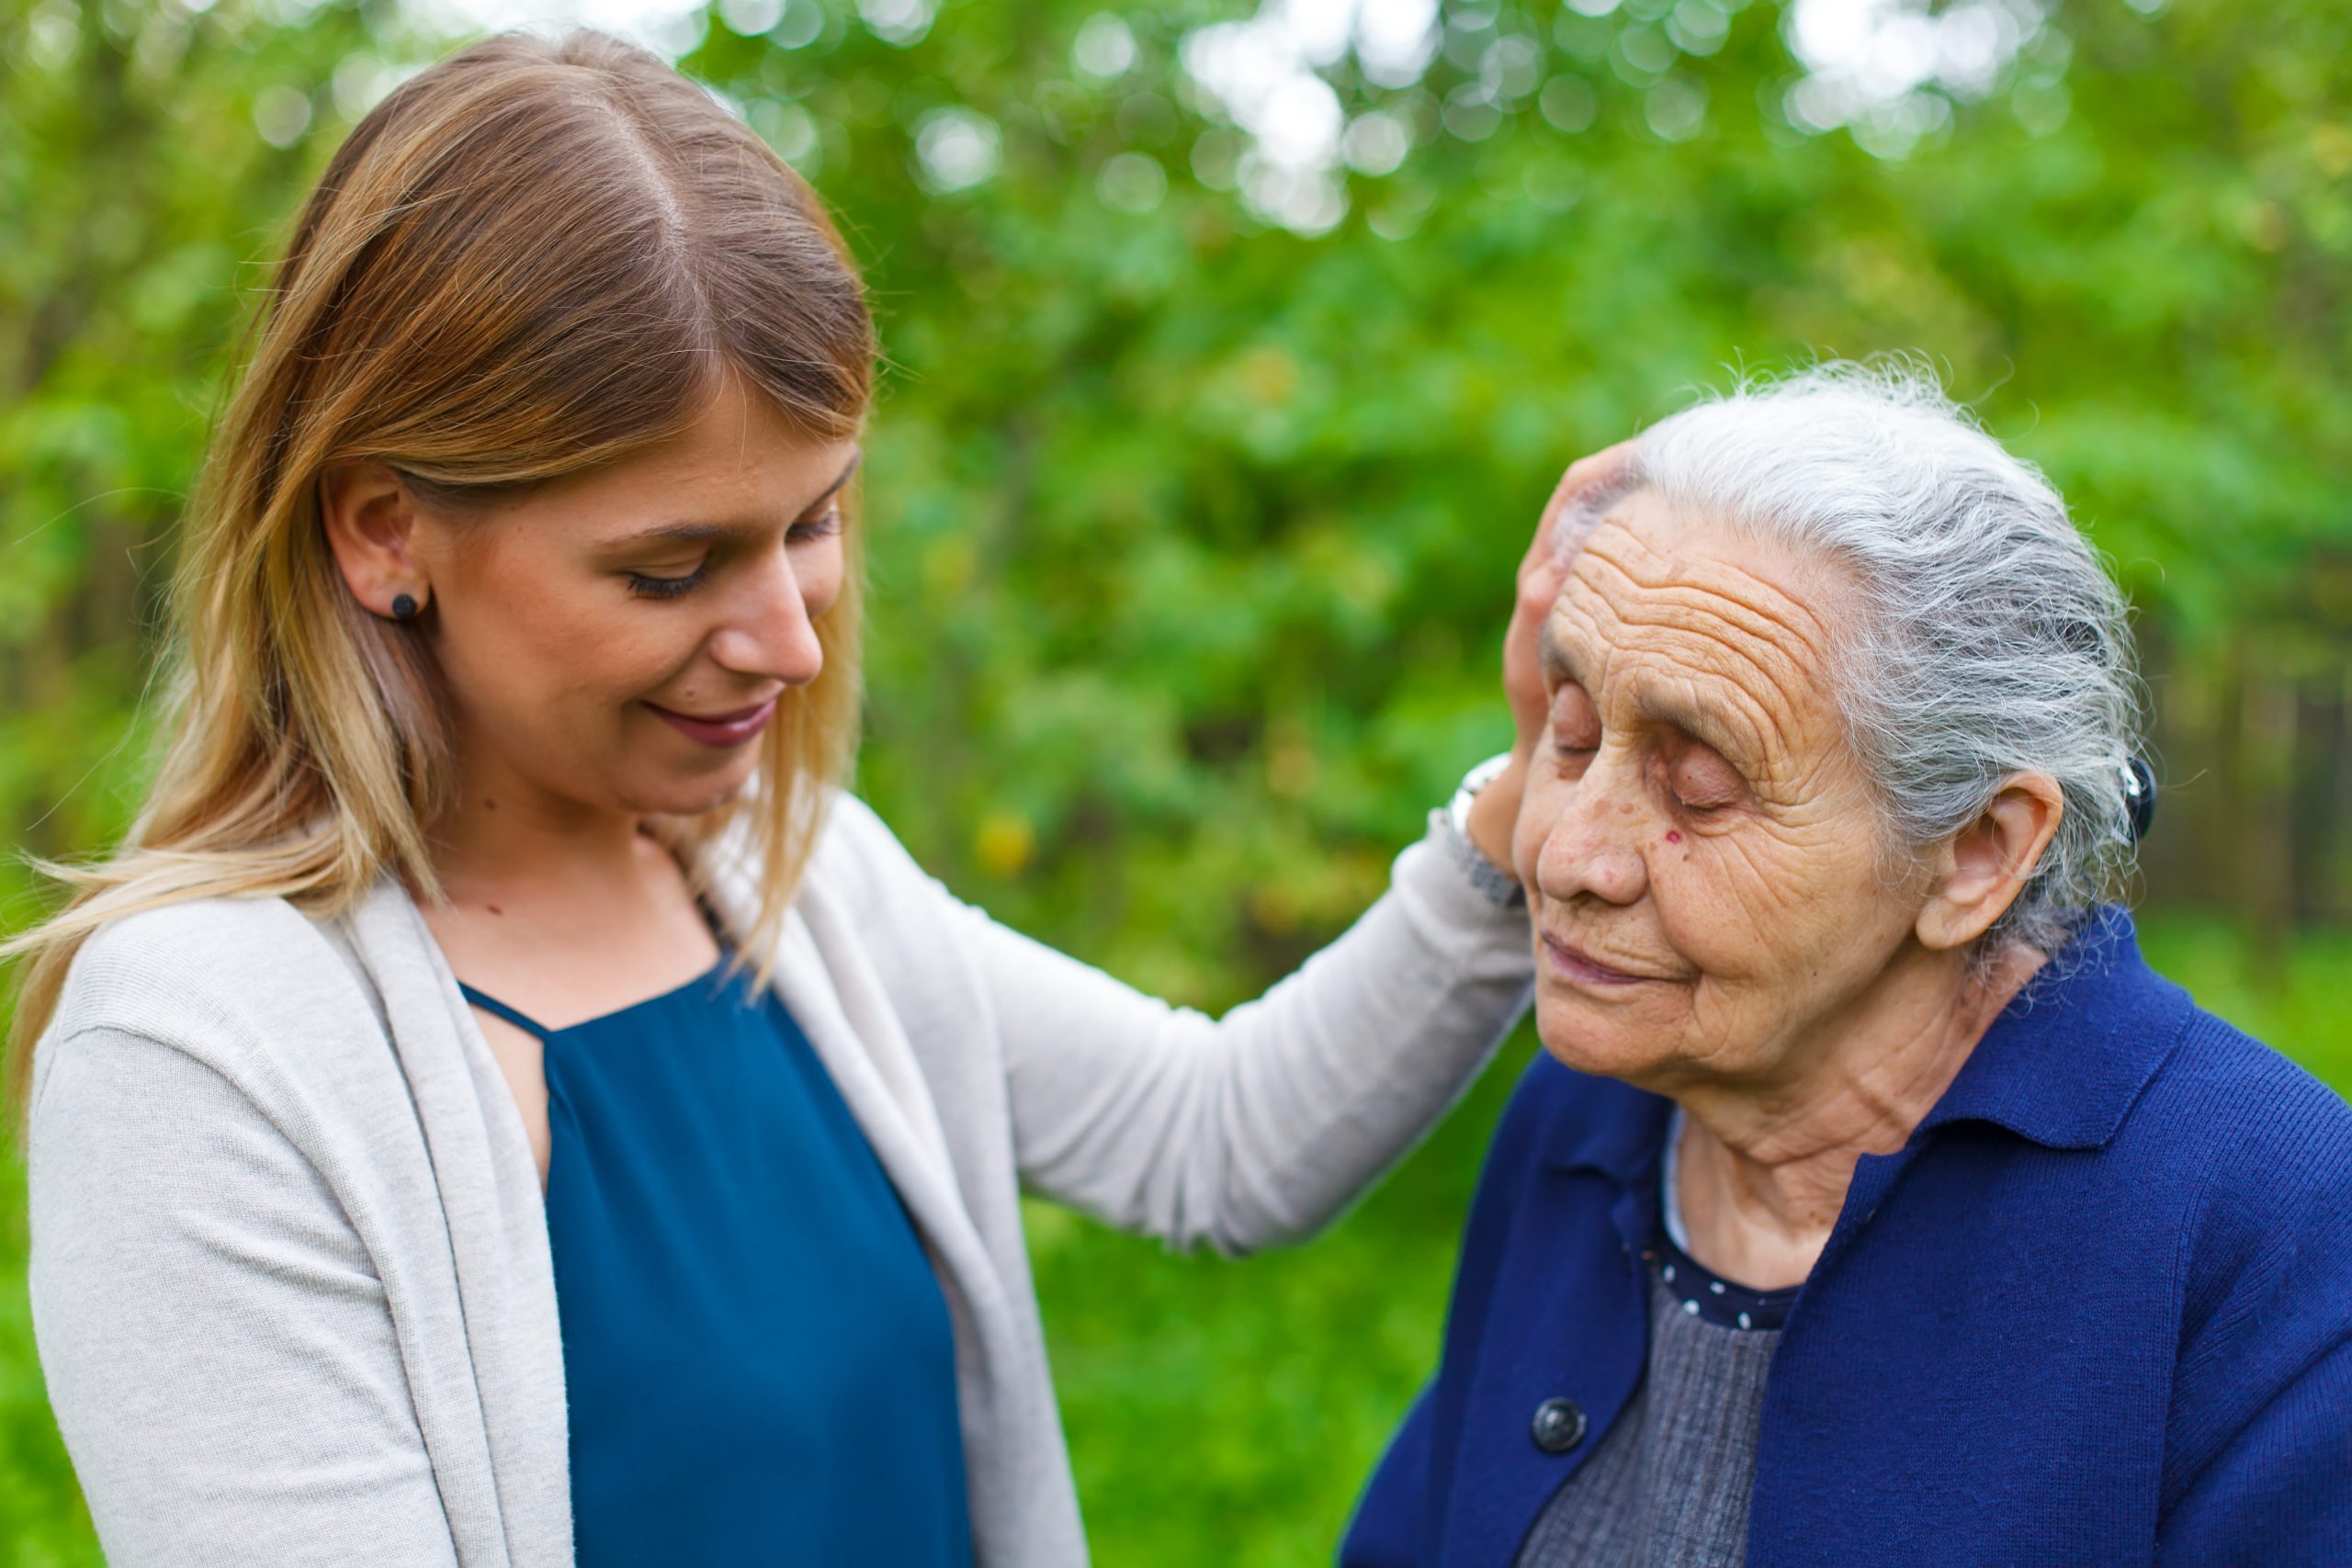 Elderly woman standing with a supportive younger woman